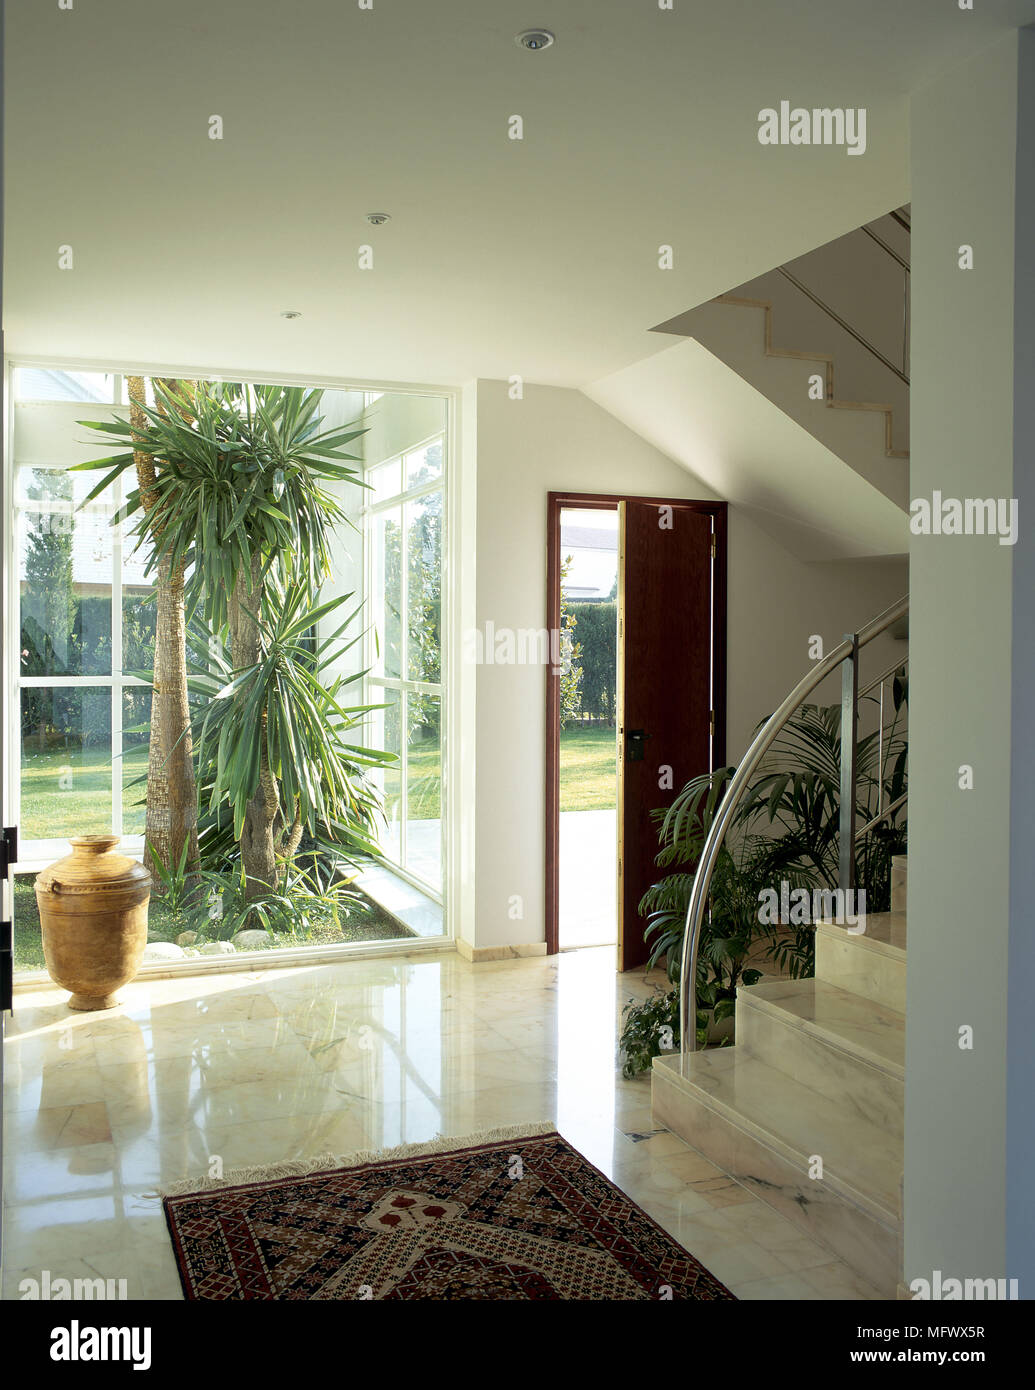 View of an open door at the entrance of a house Stock Photo